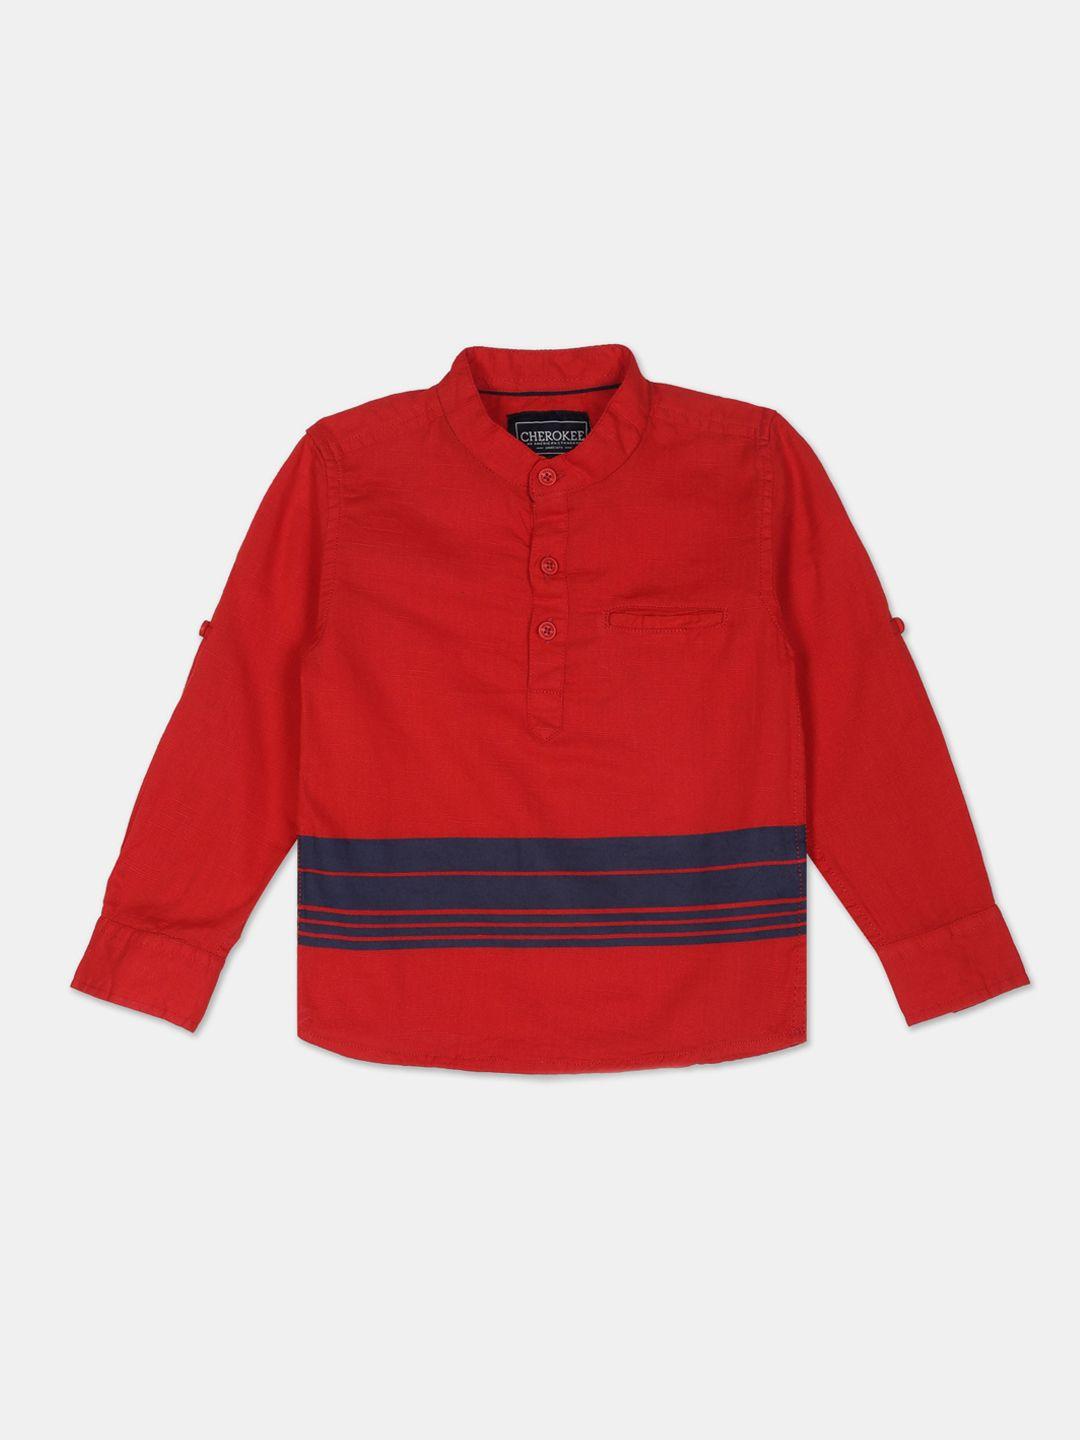 cherokee-boys-red-&-navy-blue-regular-fit-striped-detail-cotton-casual-shirt